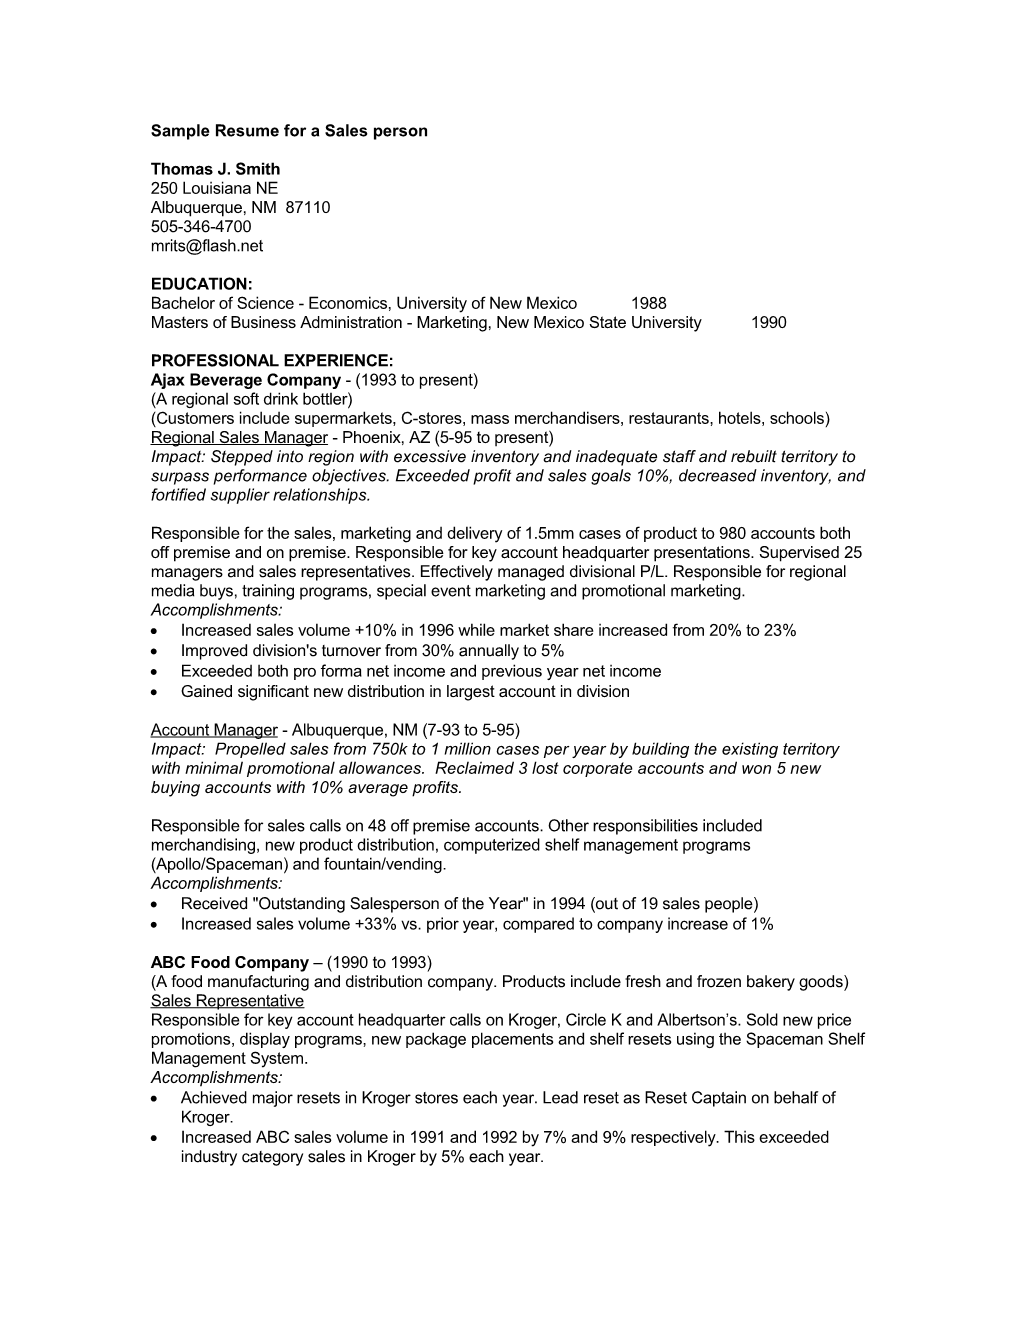 Sample Resume for a Sales Person